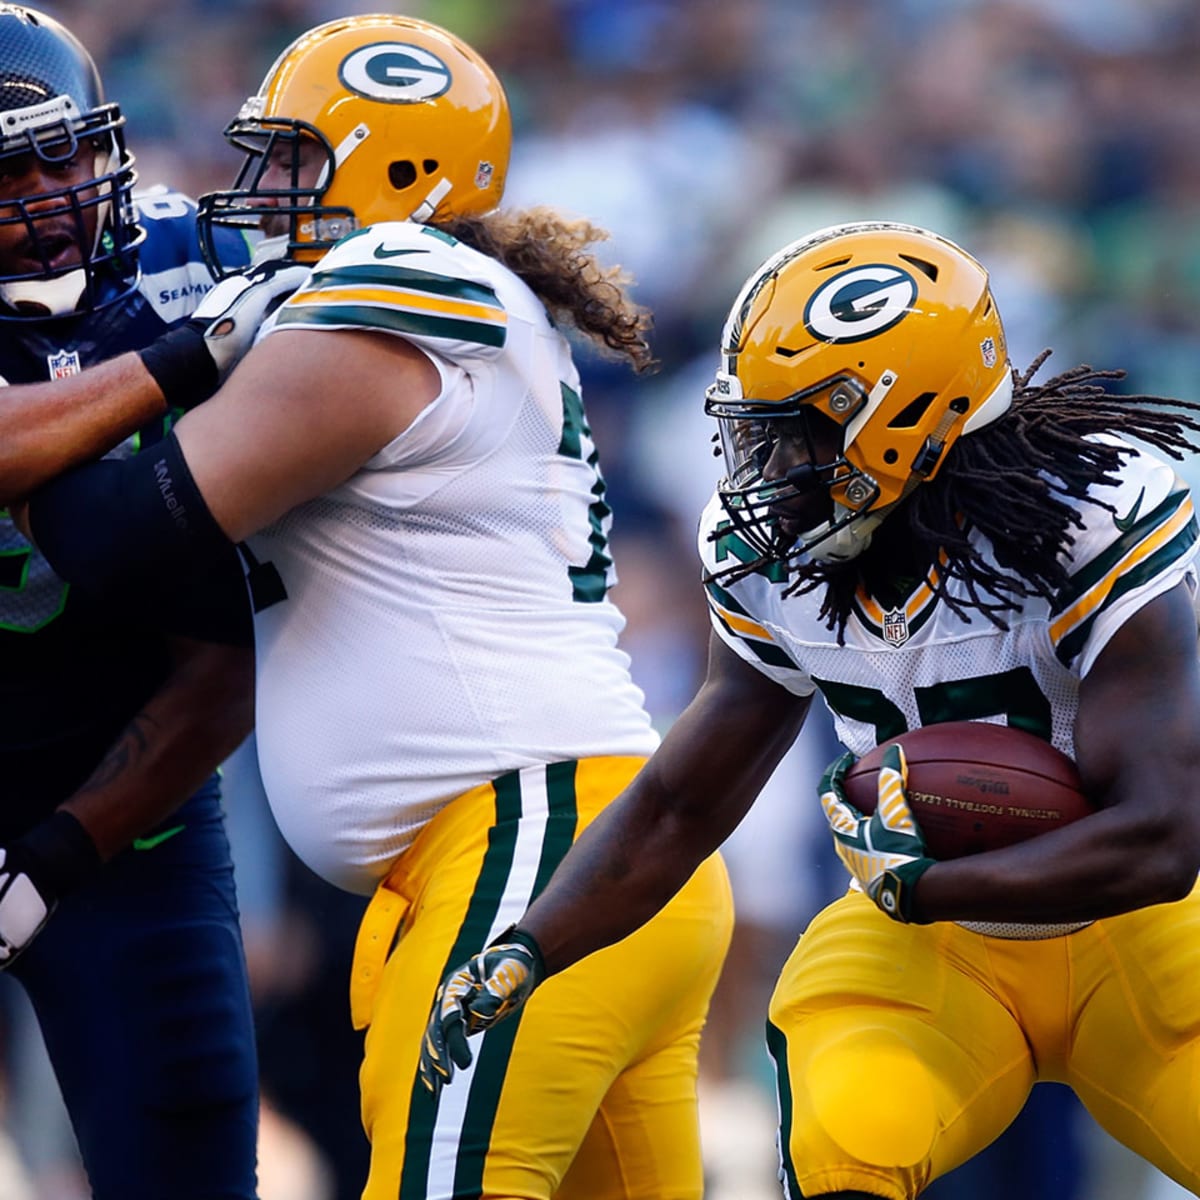 Eddie Lacy says he's not fat and not all RBs look like Adrian